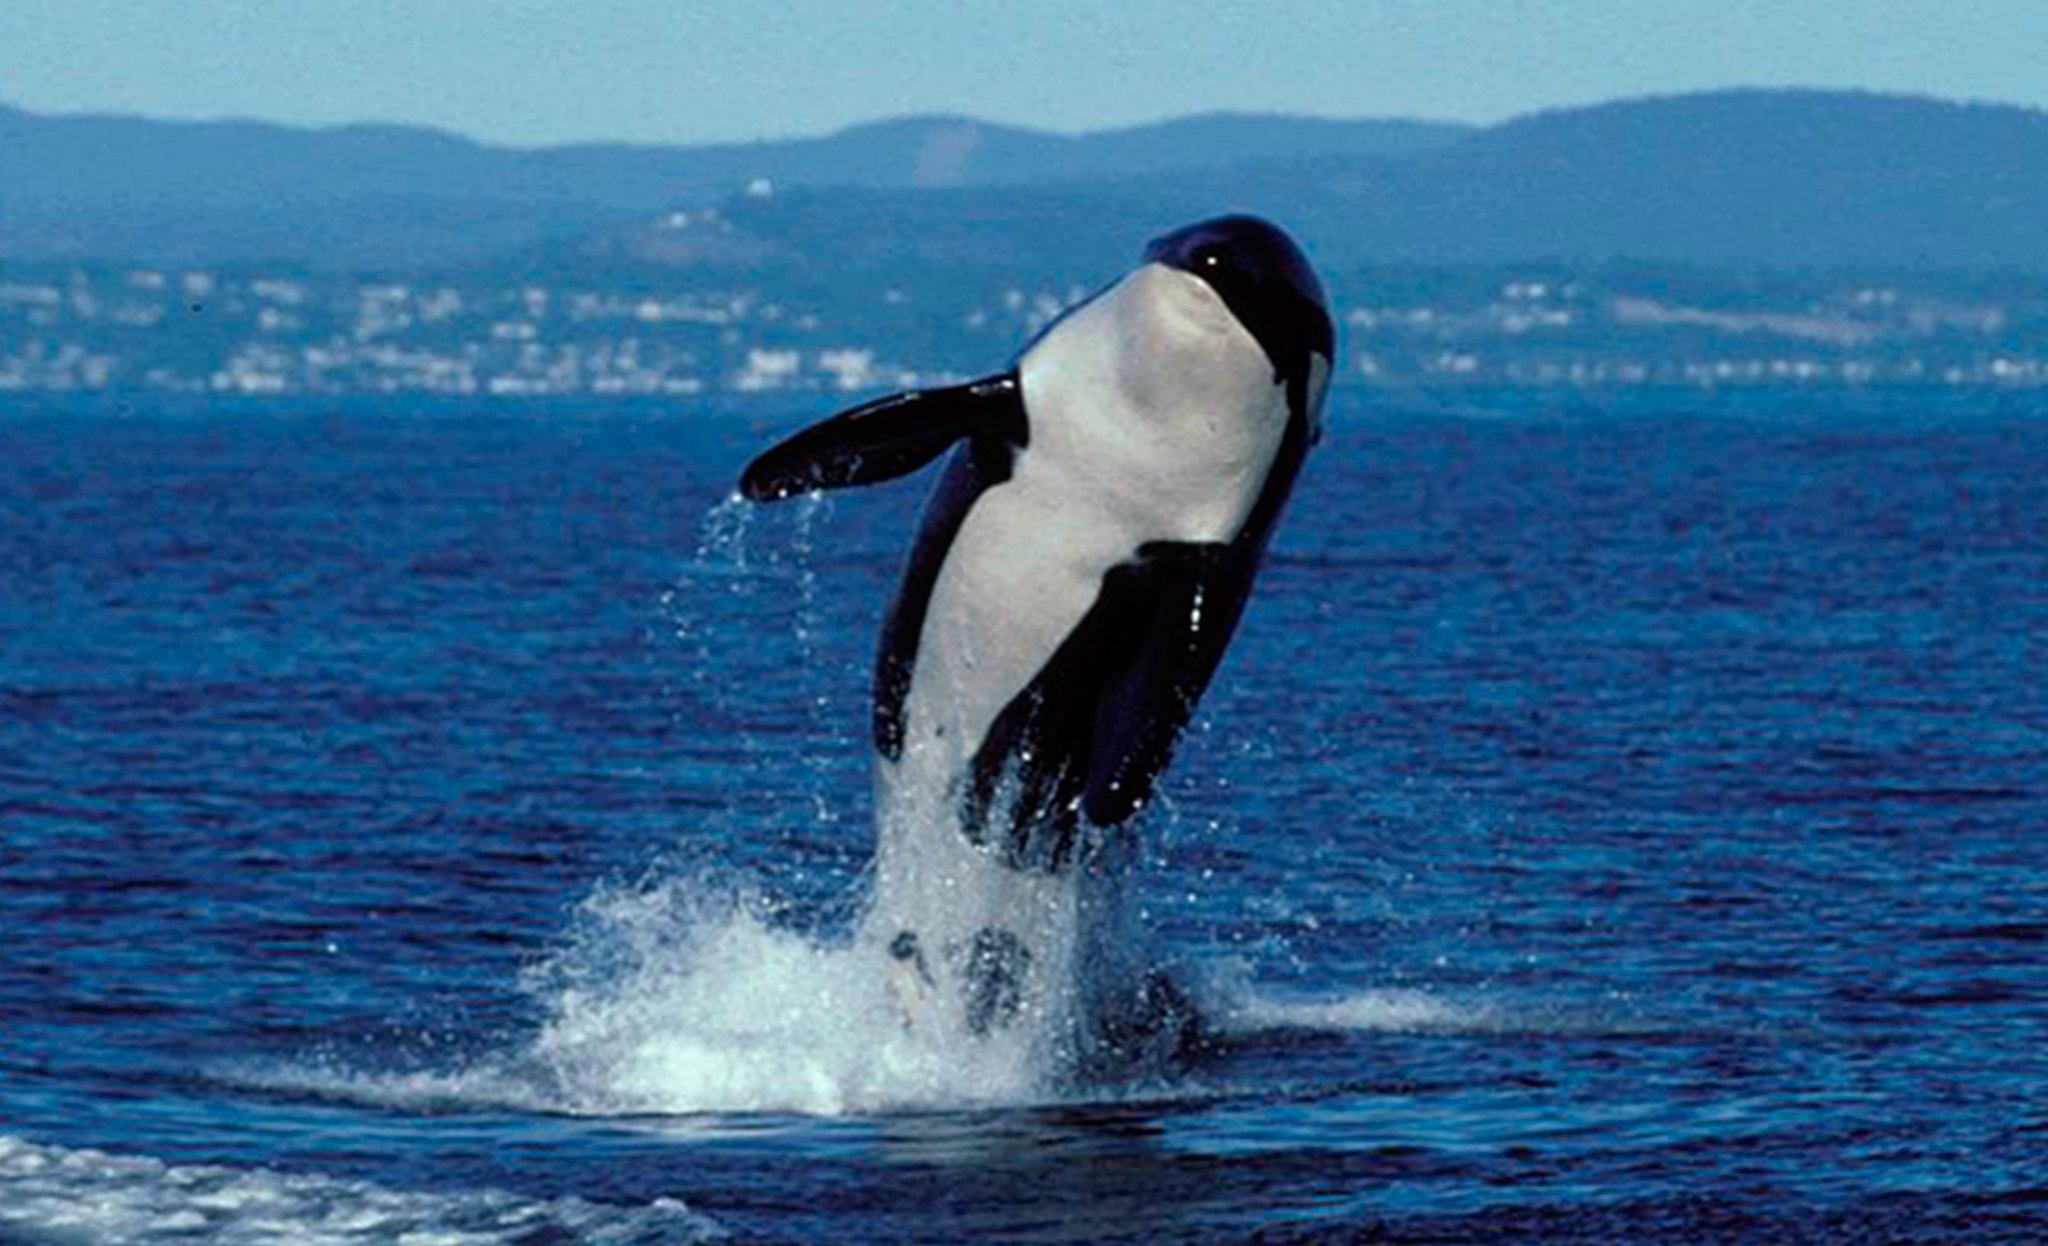 Public comment opened on petition to protect killer whales from noise